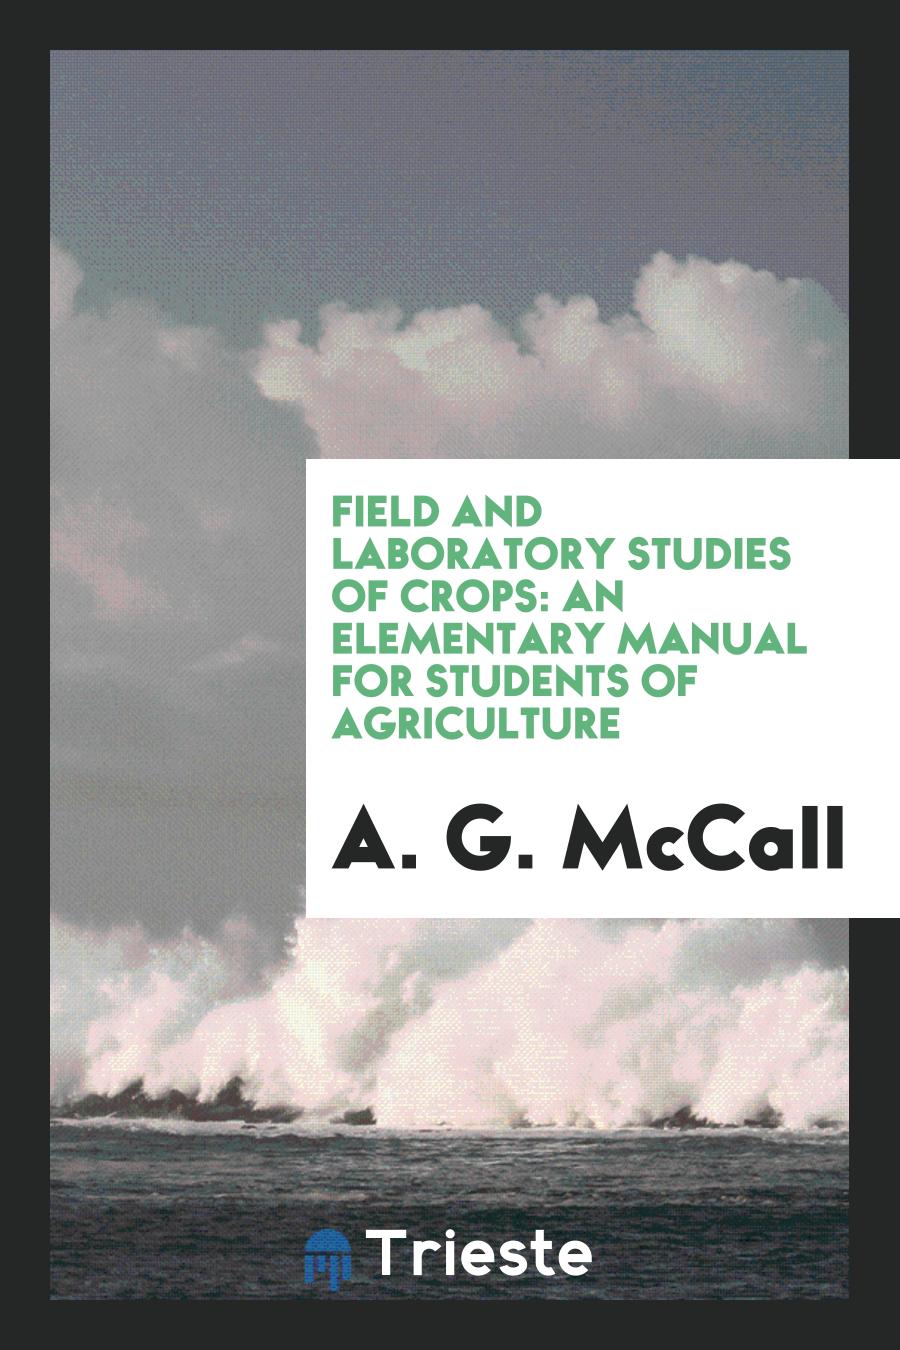 Field and Laboratory Studies of Crops: An Elementary Manual for Students of Agriculture